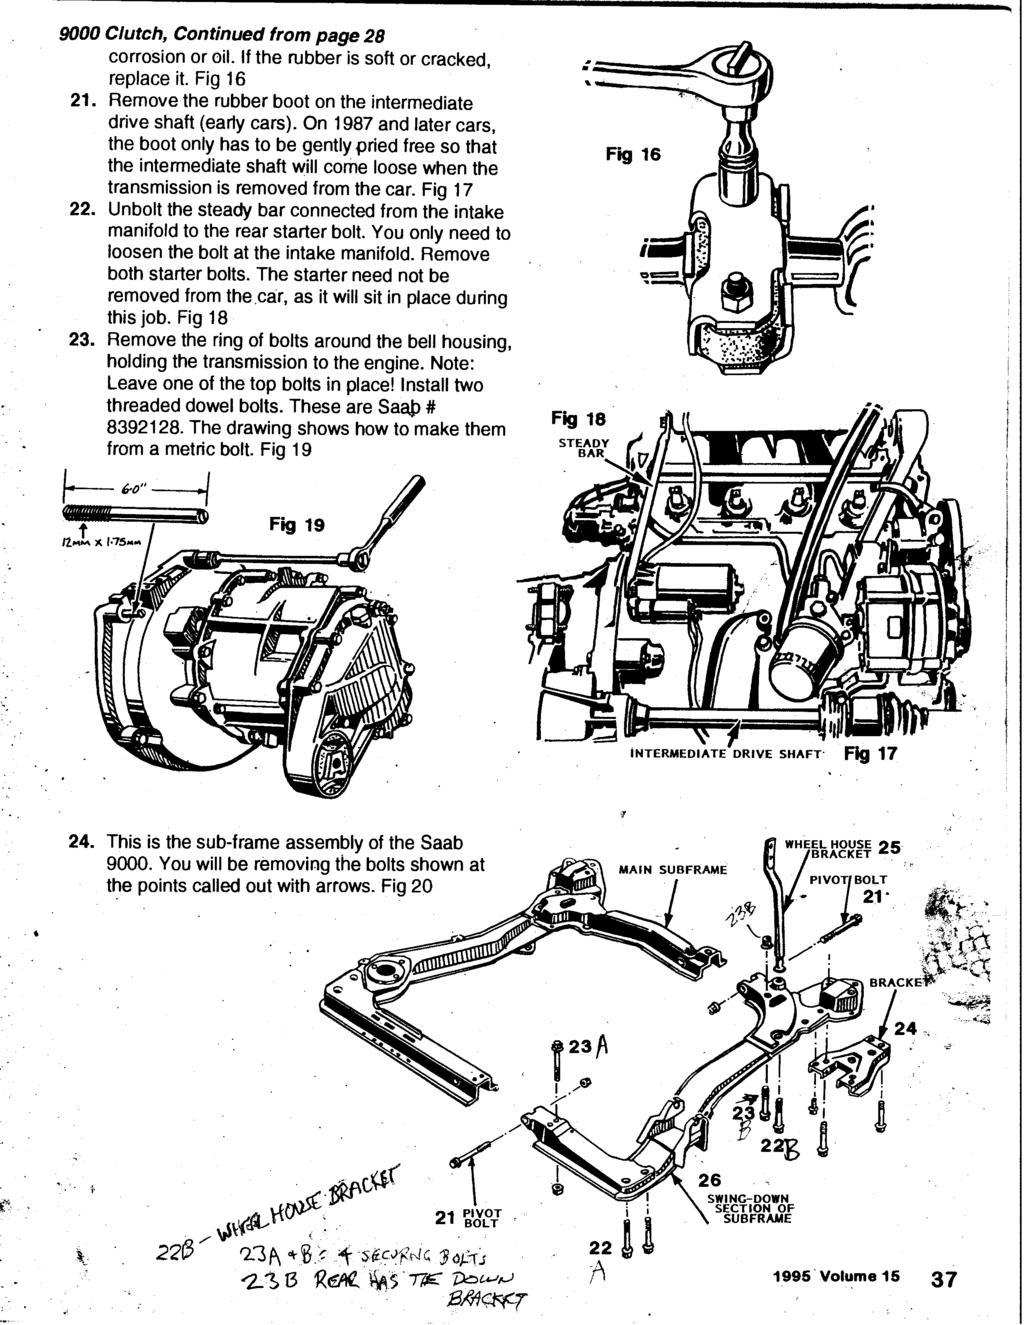 9000 Clutch, Continued from page 28 corrosion or oil. If the rubber is soft or cracked, replace it. Fig 16 21. Remove the rubber boot on the intermediate drive shaft (early cars).